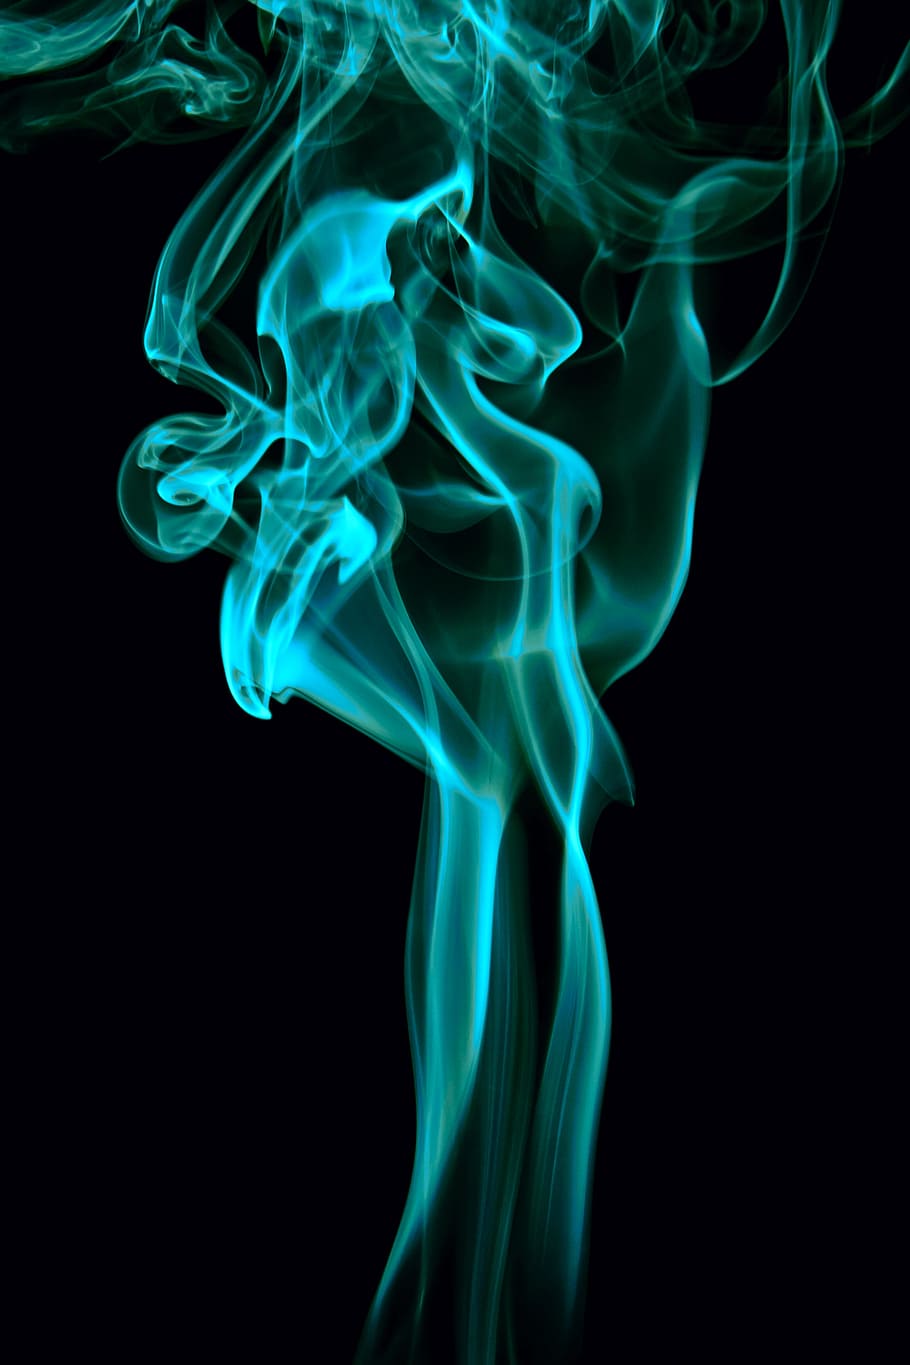 abstract, aroma, aromatherapy, background, color, smell, smoke, studio shot, smoke - physical structure, black background